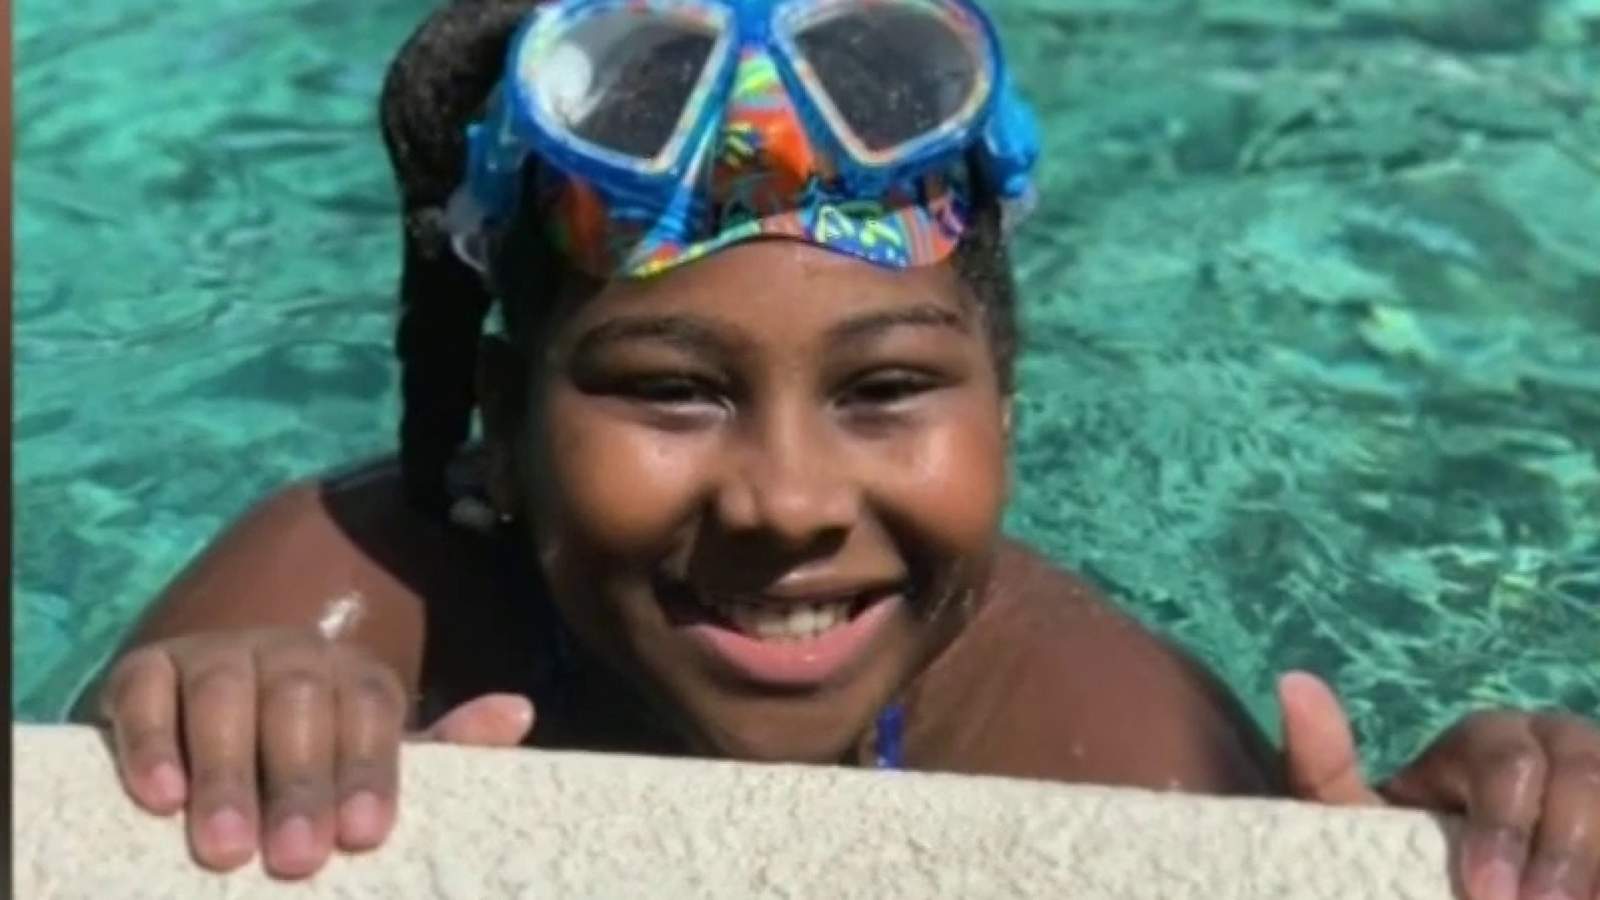 9-year-old Florida girl believed to be state’s youngest COVID-19 death